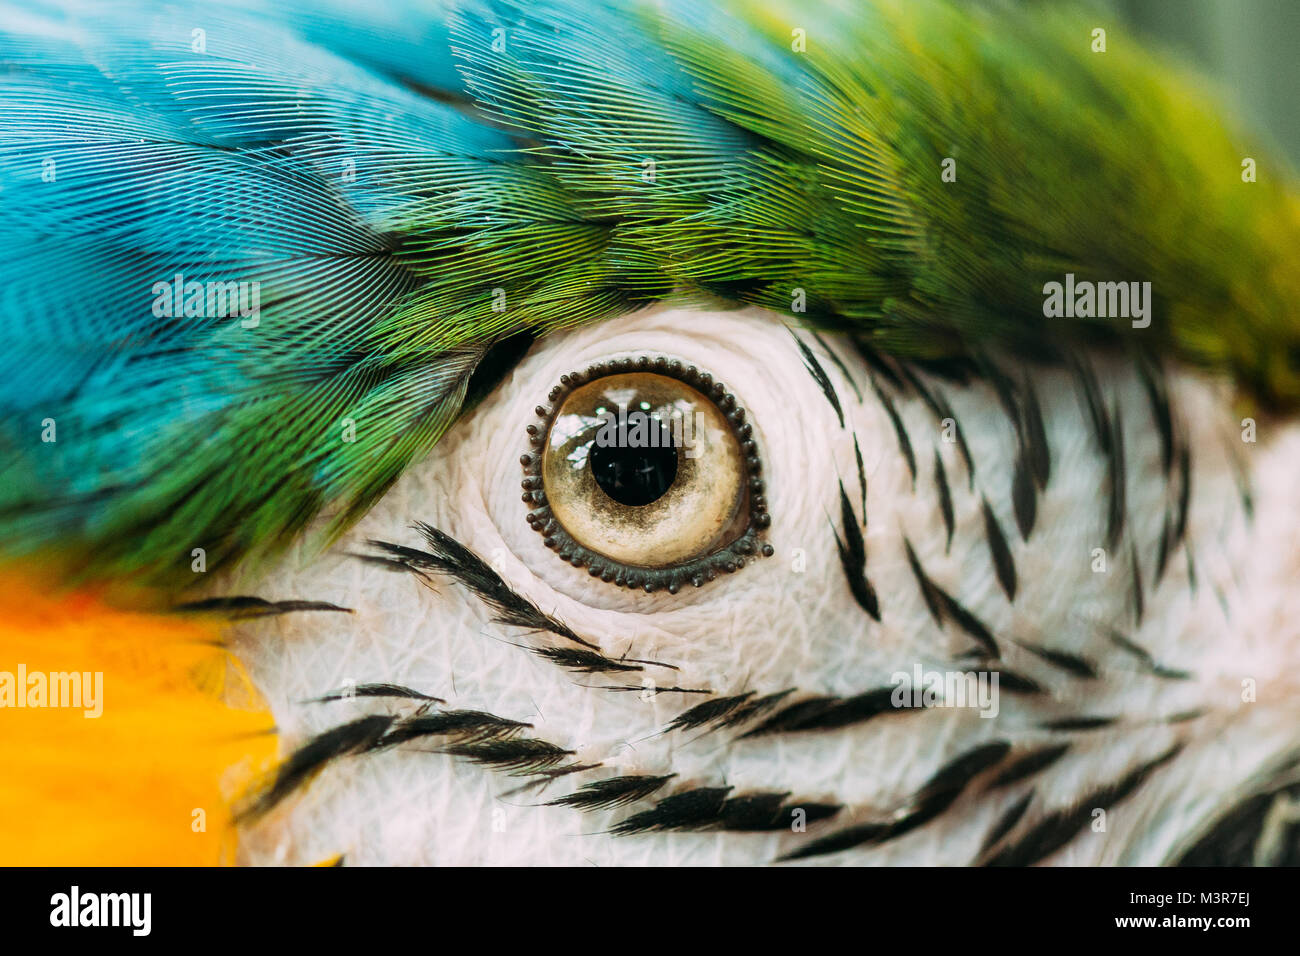 Macro photograph of the feathers of a Blue-and-Yellow Macaw